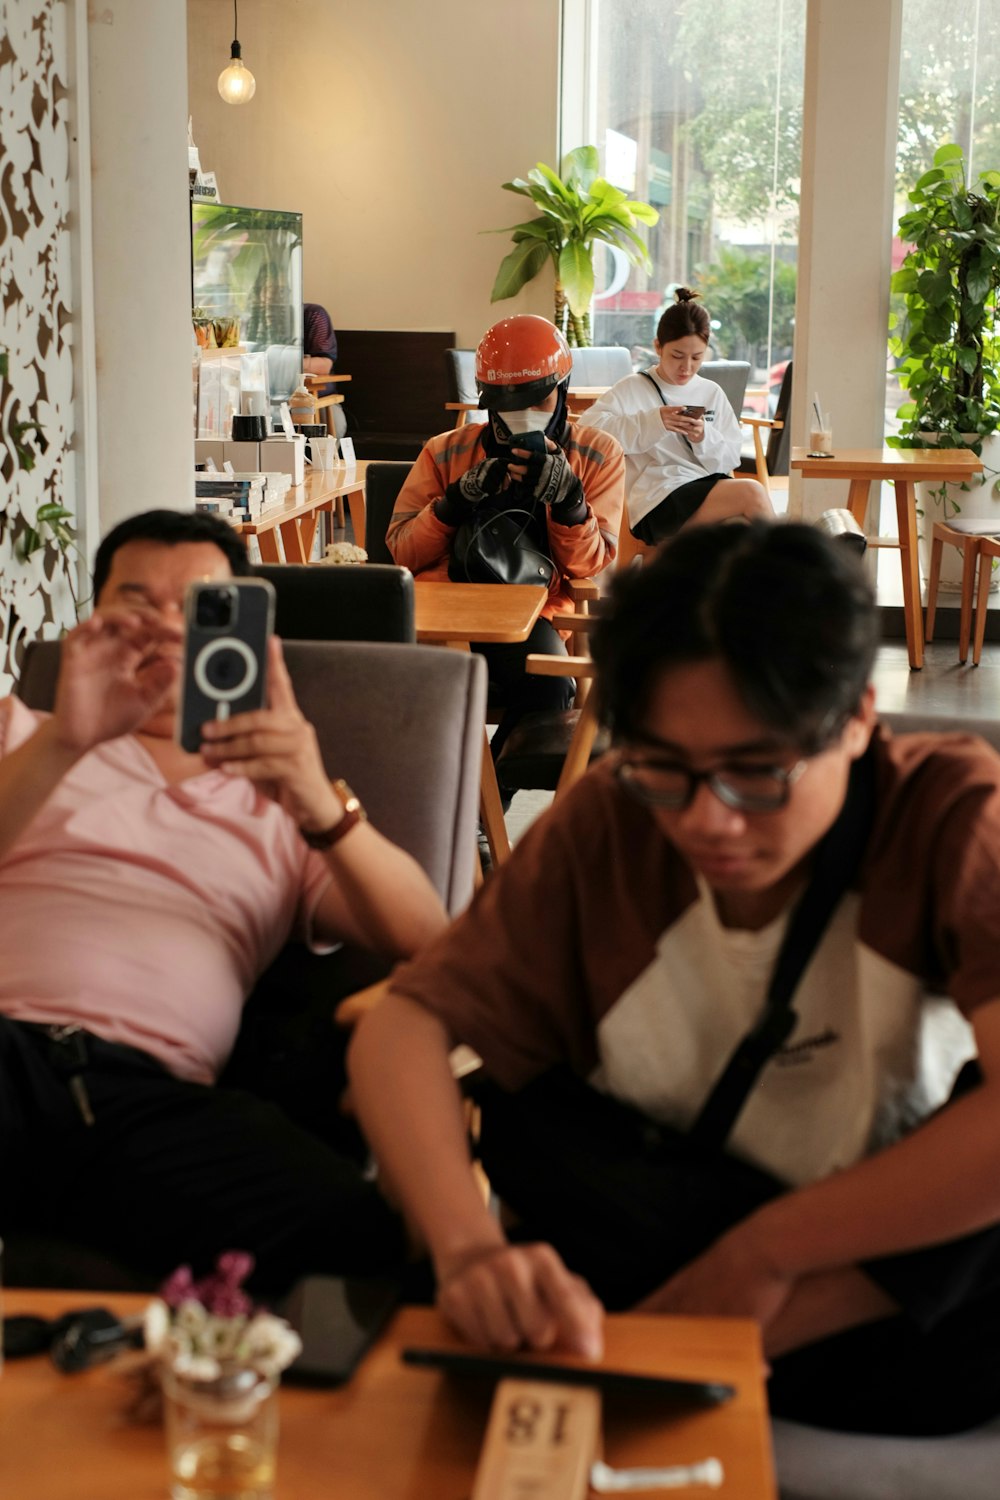 a woman taking a picture of a man in a restaurant